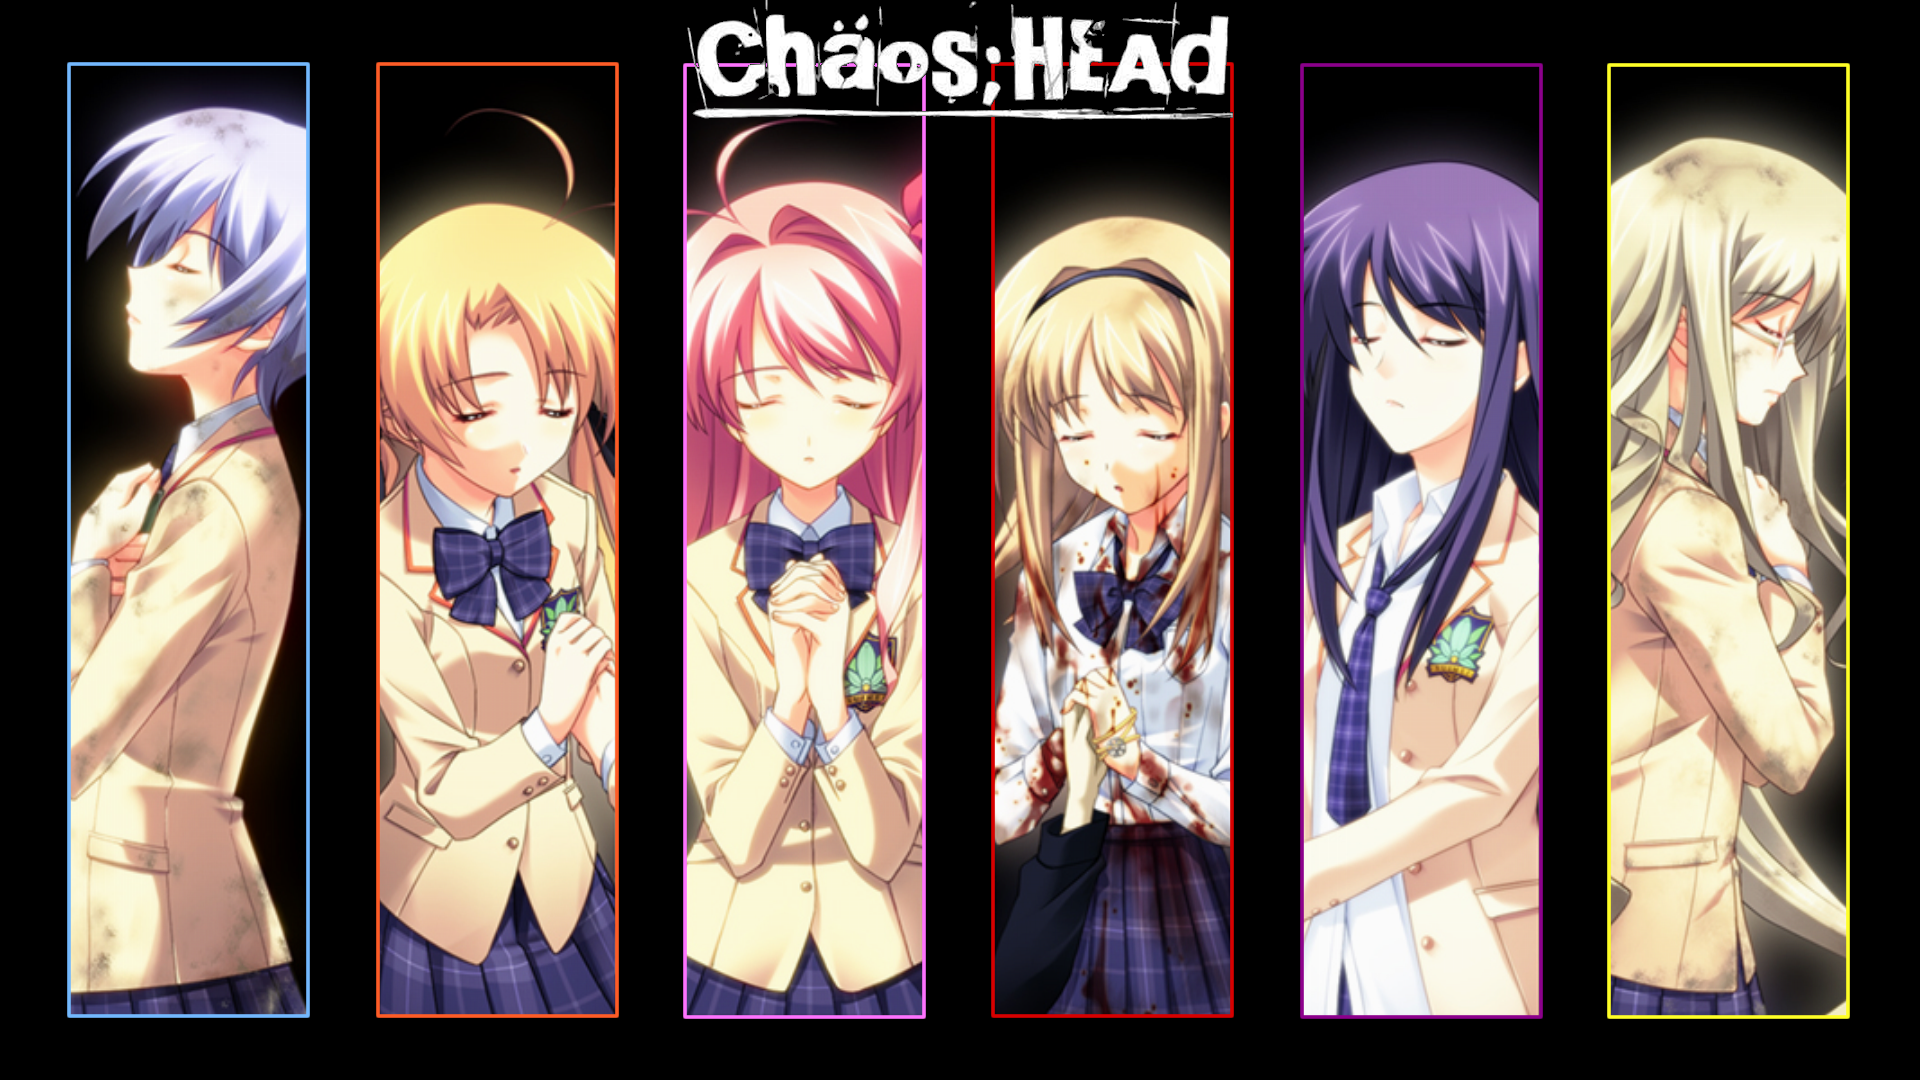 Chaos Head 756232 Full HD Widescreen wallpapers for